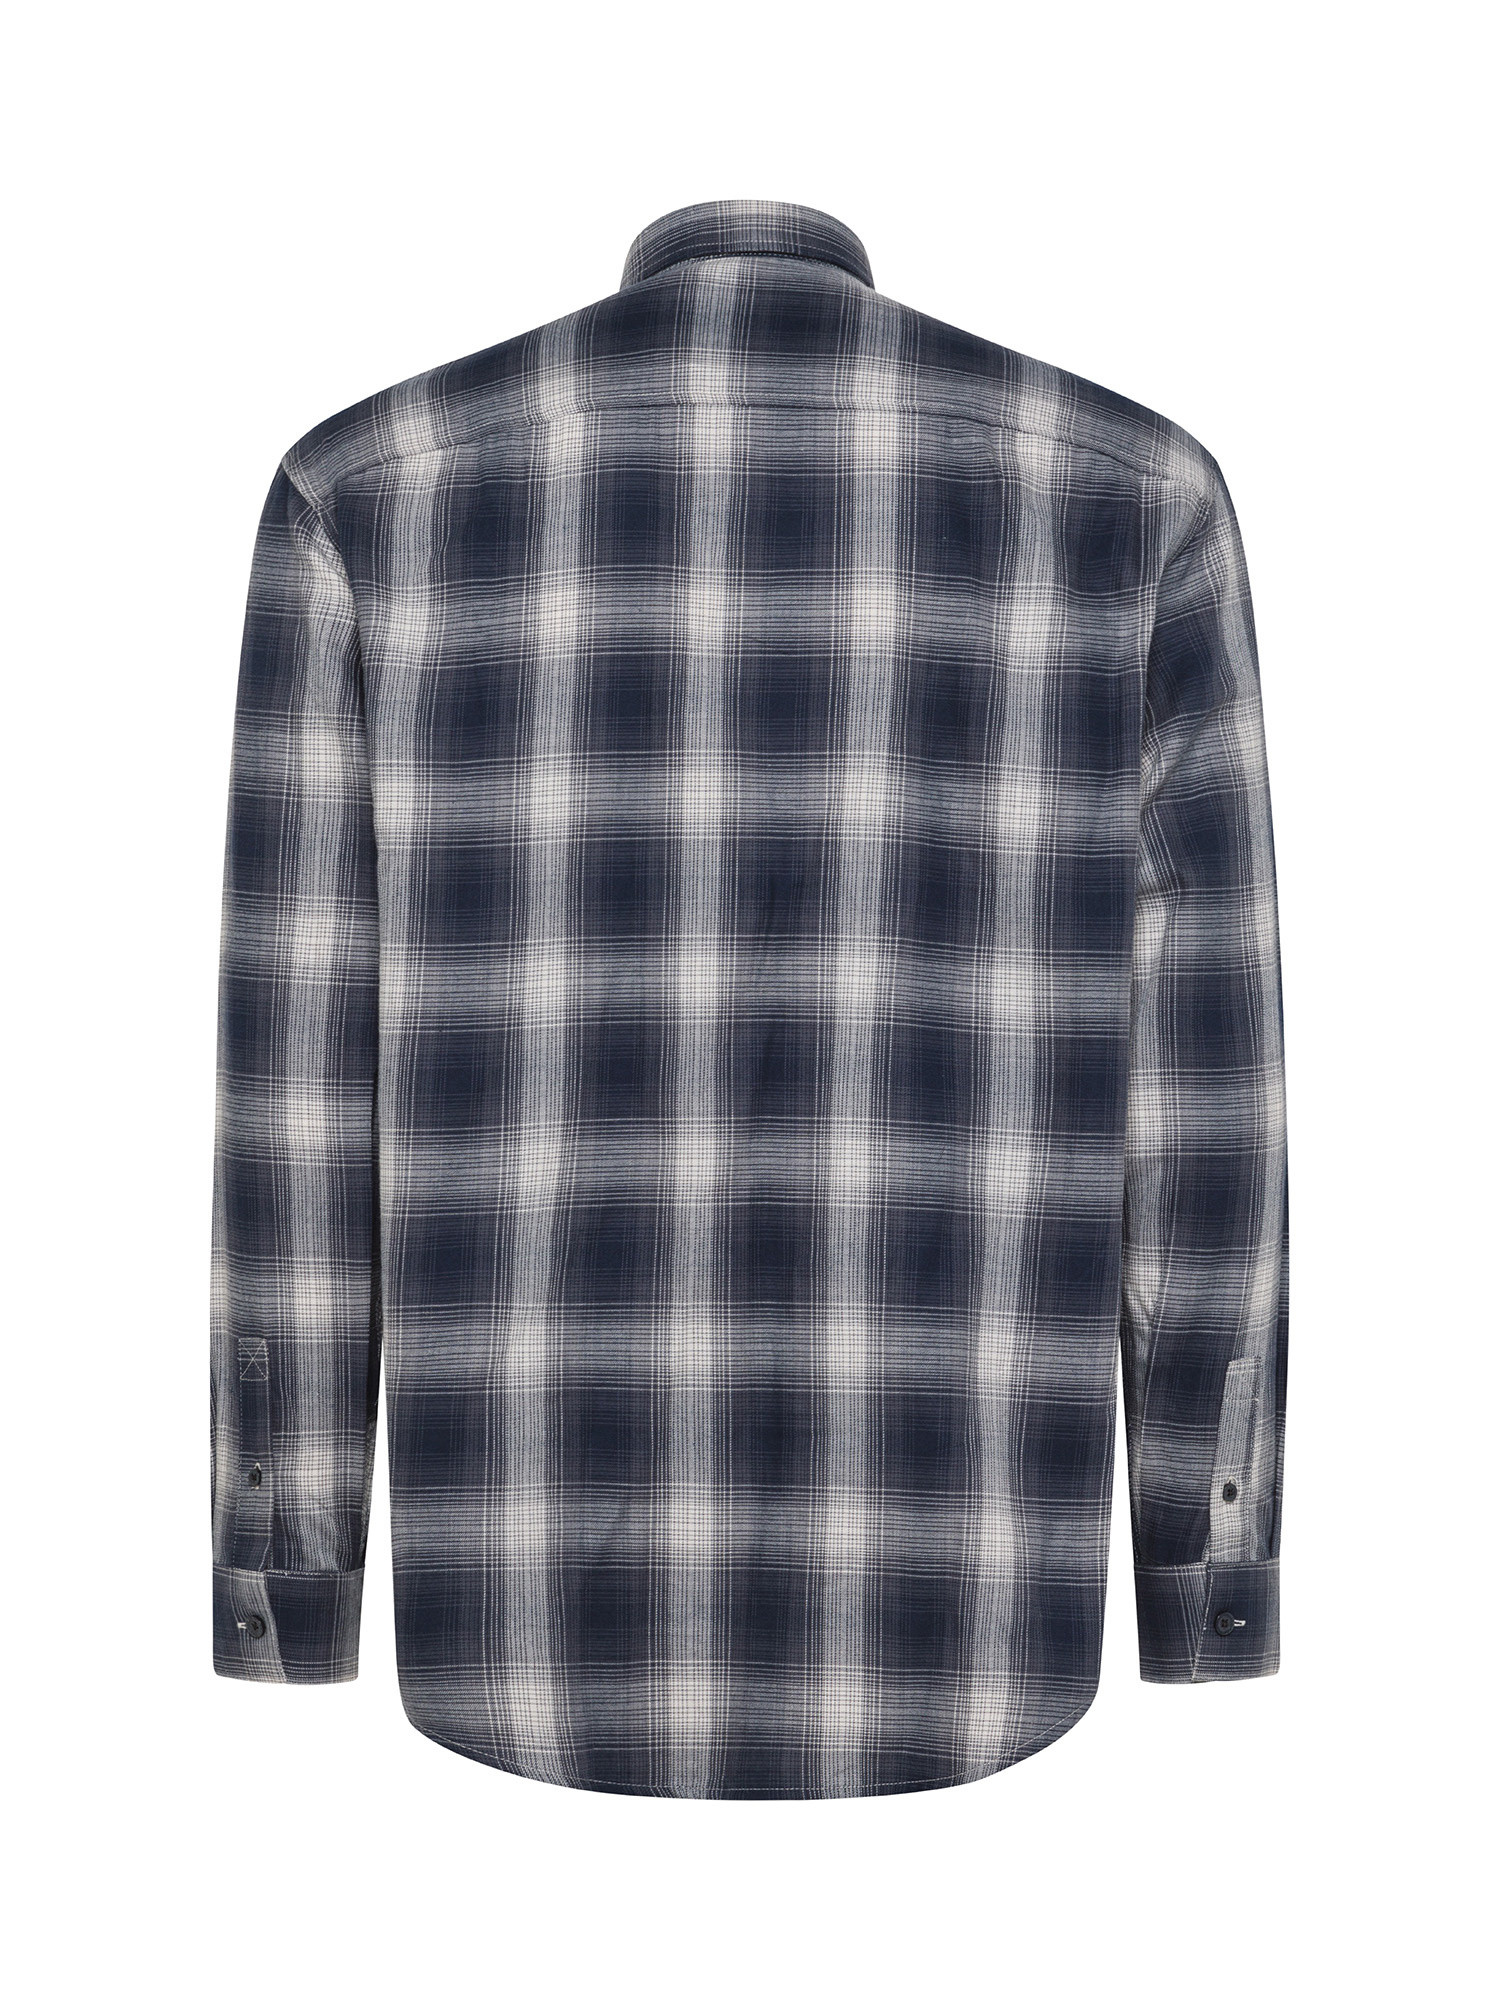 Armani Exchange - Checked shirt in cotton flannel, Dark Blue, large image number 1